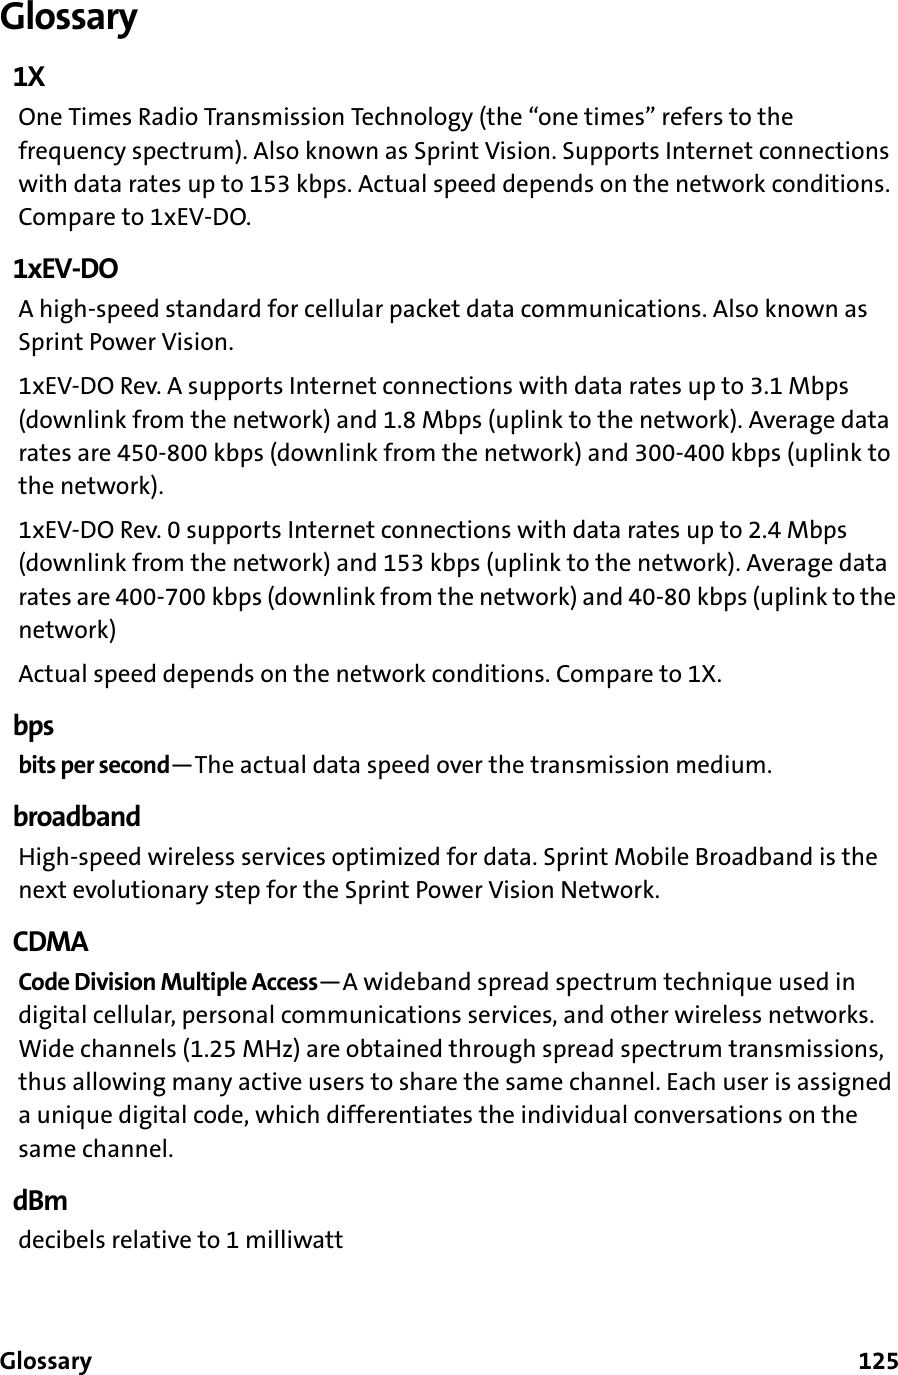 Glossary      125Glossary1XOne Times Radio Transmission Technology (the “one times” refers to the frequency spectrum). Also known as Sprint Vision. Supports Internet connections with data rates up to 153 kbps. Actual speed depends on the network conditions. Compare to 1xEV-DO.1xEV-DOA high-speed standard for cellular packet data communications. Also known as Sprint Power Vision.1xEV-DO Rev. A supports Internet connections with data rates up to 3.1 Mbps (downlink from the network) and 1.8 Mbps (uplink to the network). Average data rates are 450-800 kbps (downlink from the network) and 300-400 kbps (uplink to the network).1xEV-DO Rev. 0 supports Internet connections with data rates up to 2.4 Mbps (downlink from the network) and 153 kbps (uplink to the network). Average data rates are 400-700 kbps (downlink from the network) and 40-80 kbps (uplink to the network)Actual speed depends on the network conditions. Compare to 1X.bpsbits per second—The actual data speed over the transmission medium.broadbandHigh-speed wireless services optimized for data. Sprint Mobile Broadband is the next evolutionary step for the Sprint Power Vision Network.CDMACode Division Multiple Access—A wideband spread spectrum technique used in digital cellular, personal communications services, and other wireless networks. Wide channels (1.25 MHz) are obtained through spread spectrum transmissions, thus allowing many active users to share the same channel. Each user is assigned a unique digital code, which differentiates the individual conversations on the same channel.dBmdecibels relative to 1 milliwatt